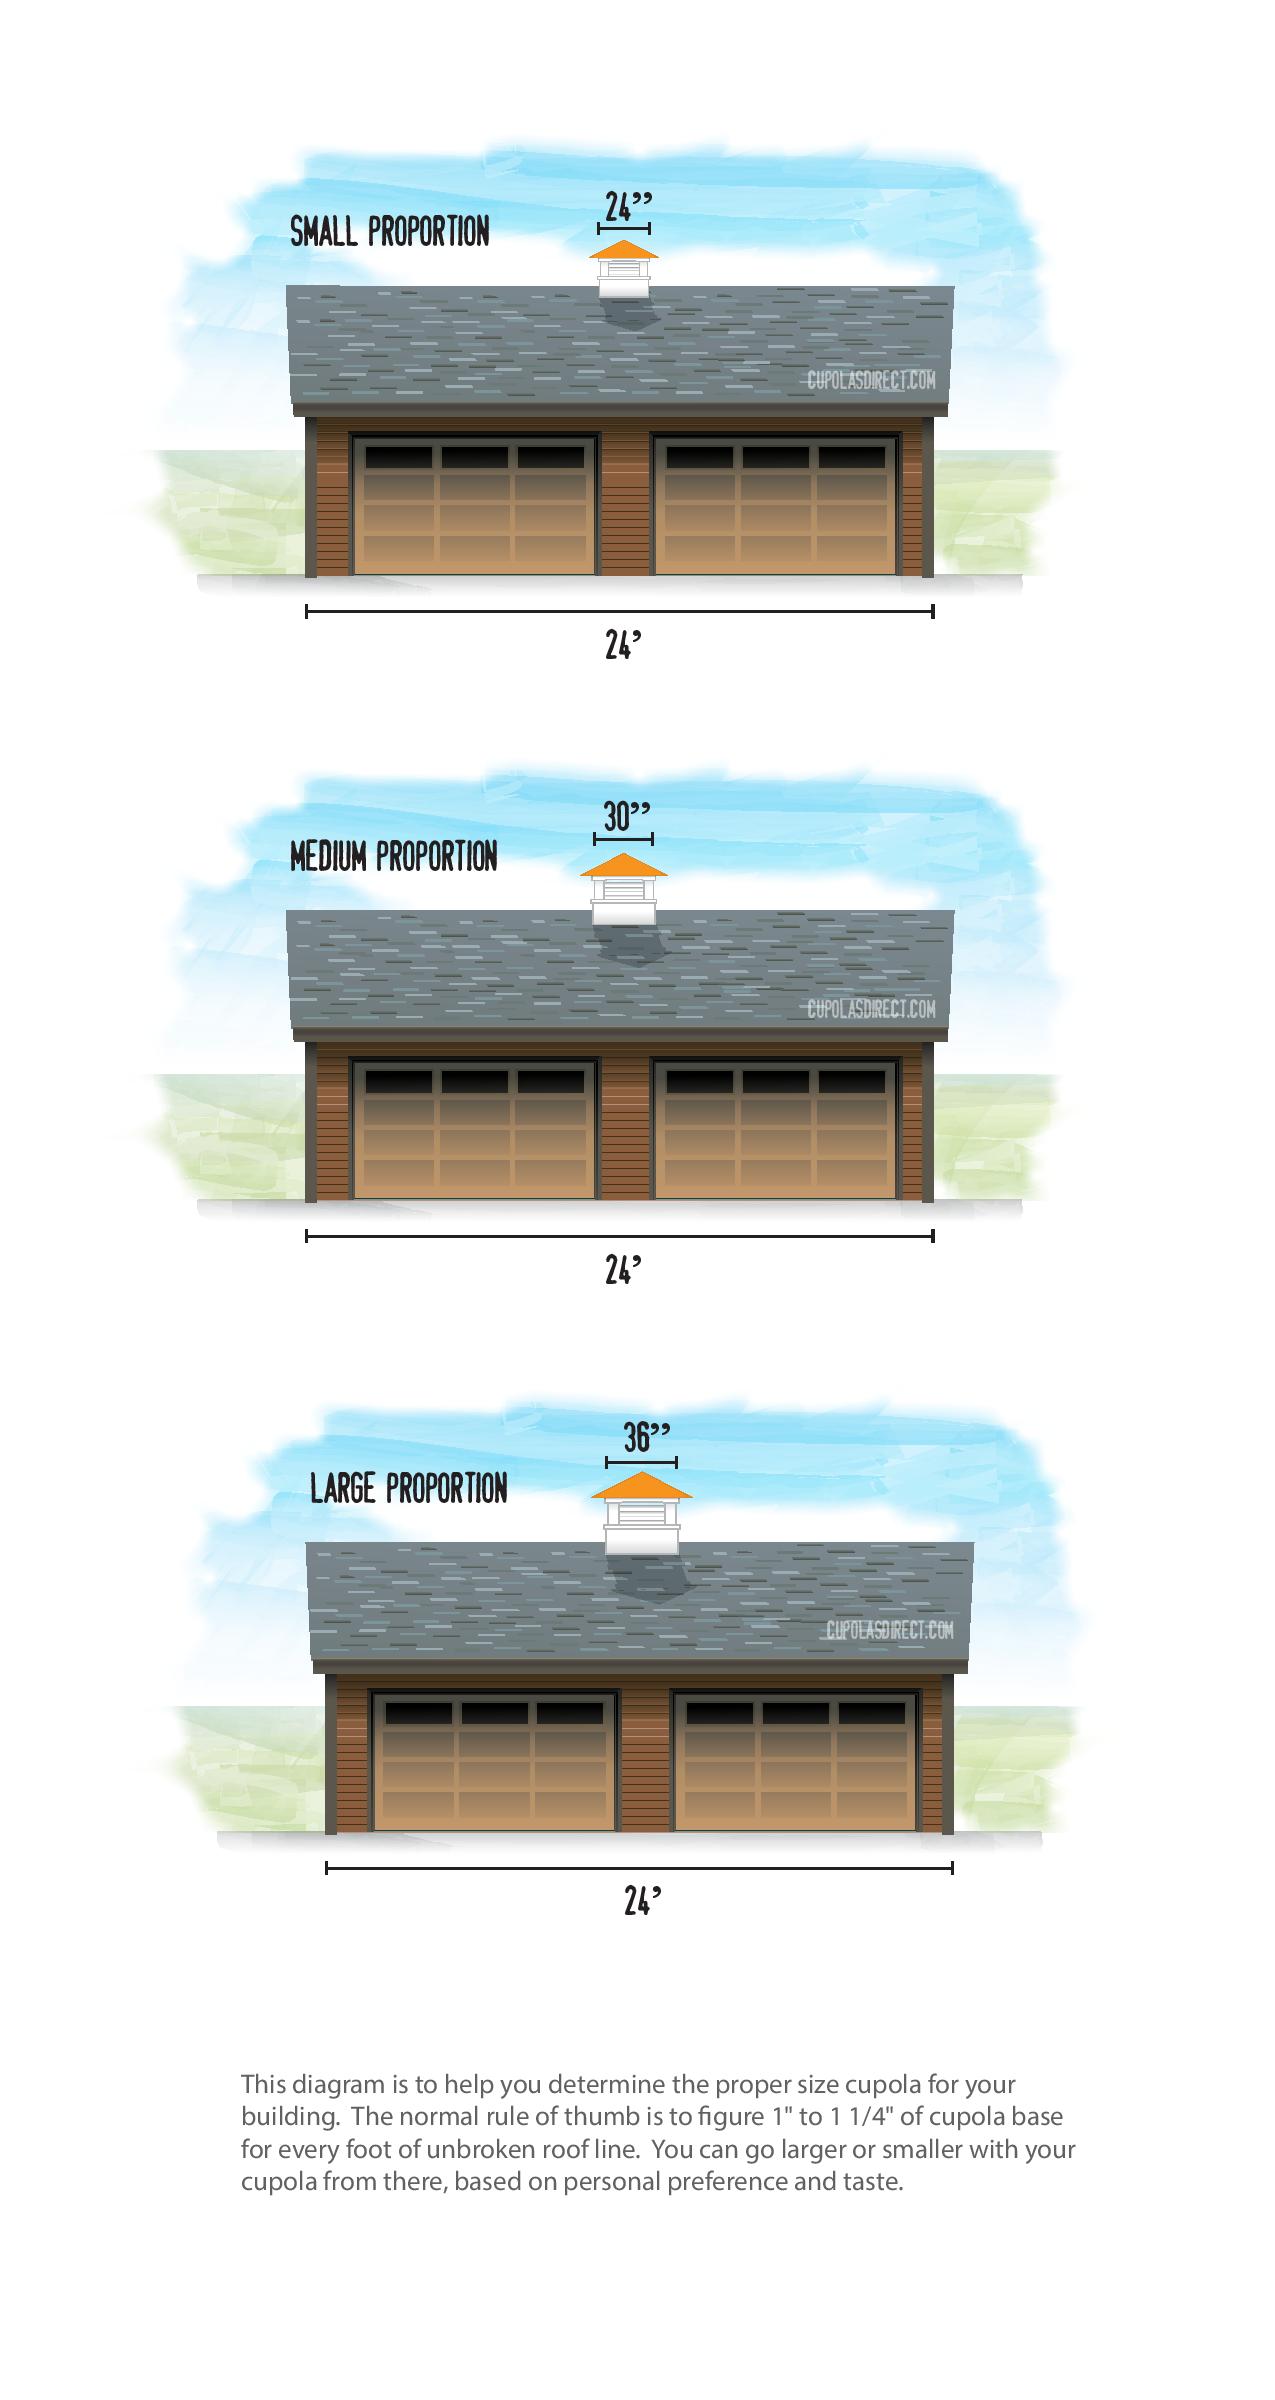 24, 30, and 36 inch cupolas on 24 foot buildings - cupola sizing diagrams for small, medium, and large proportions